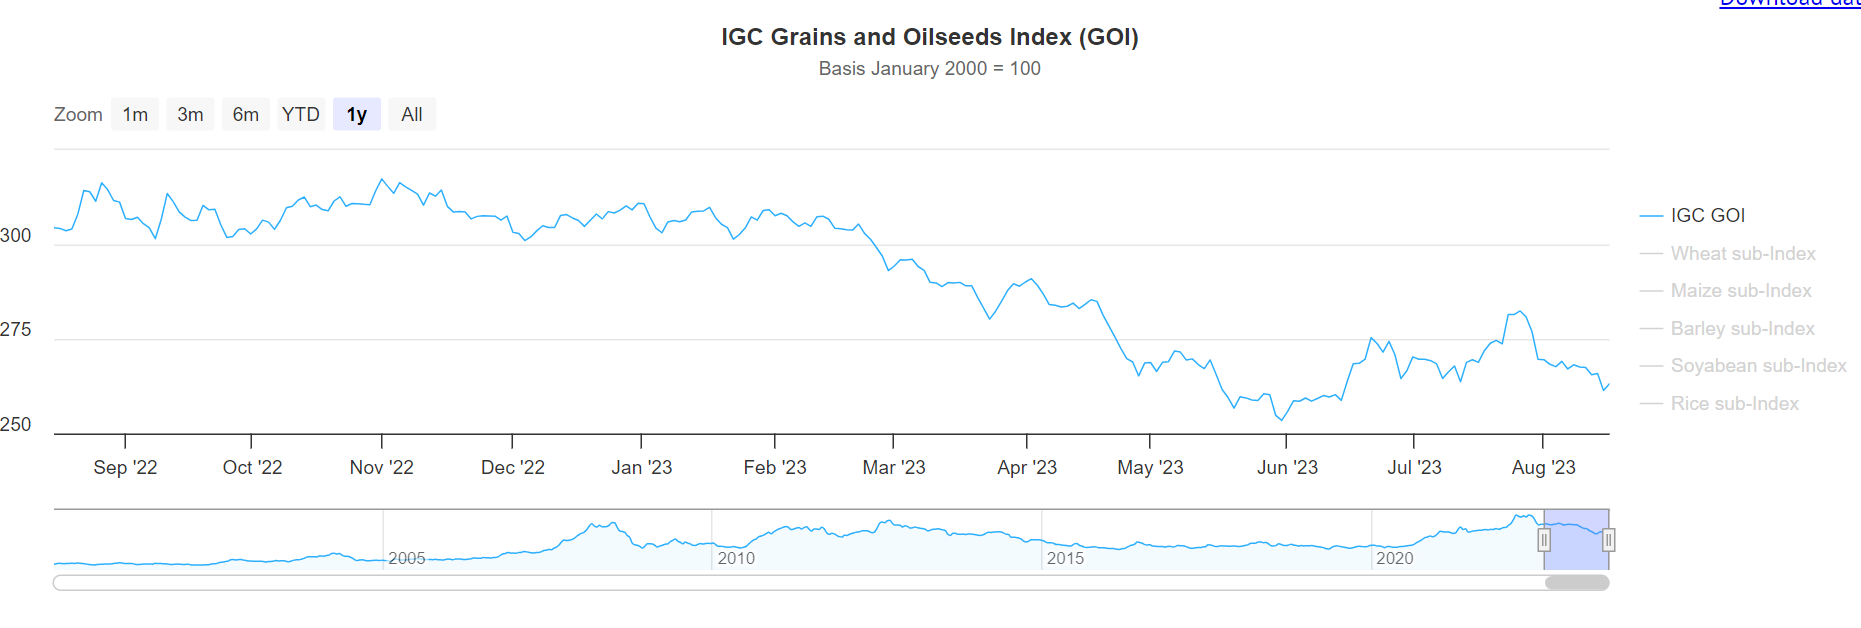 IGC Grains and oilseed index (vk 33)